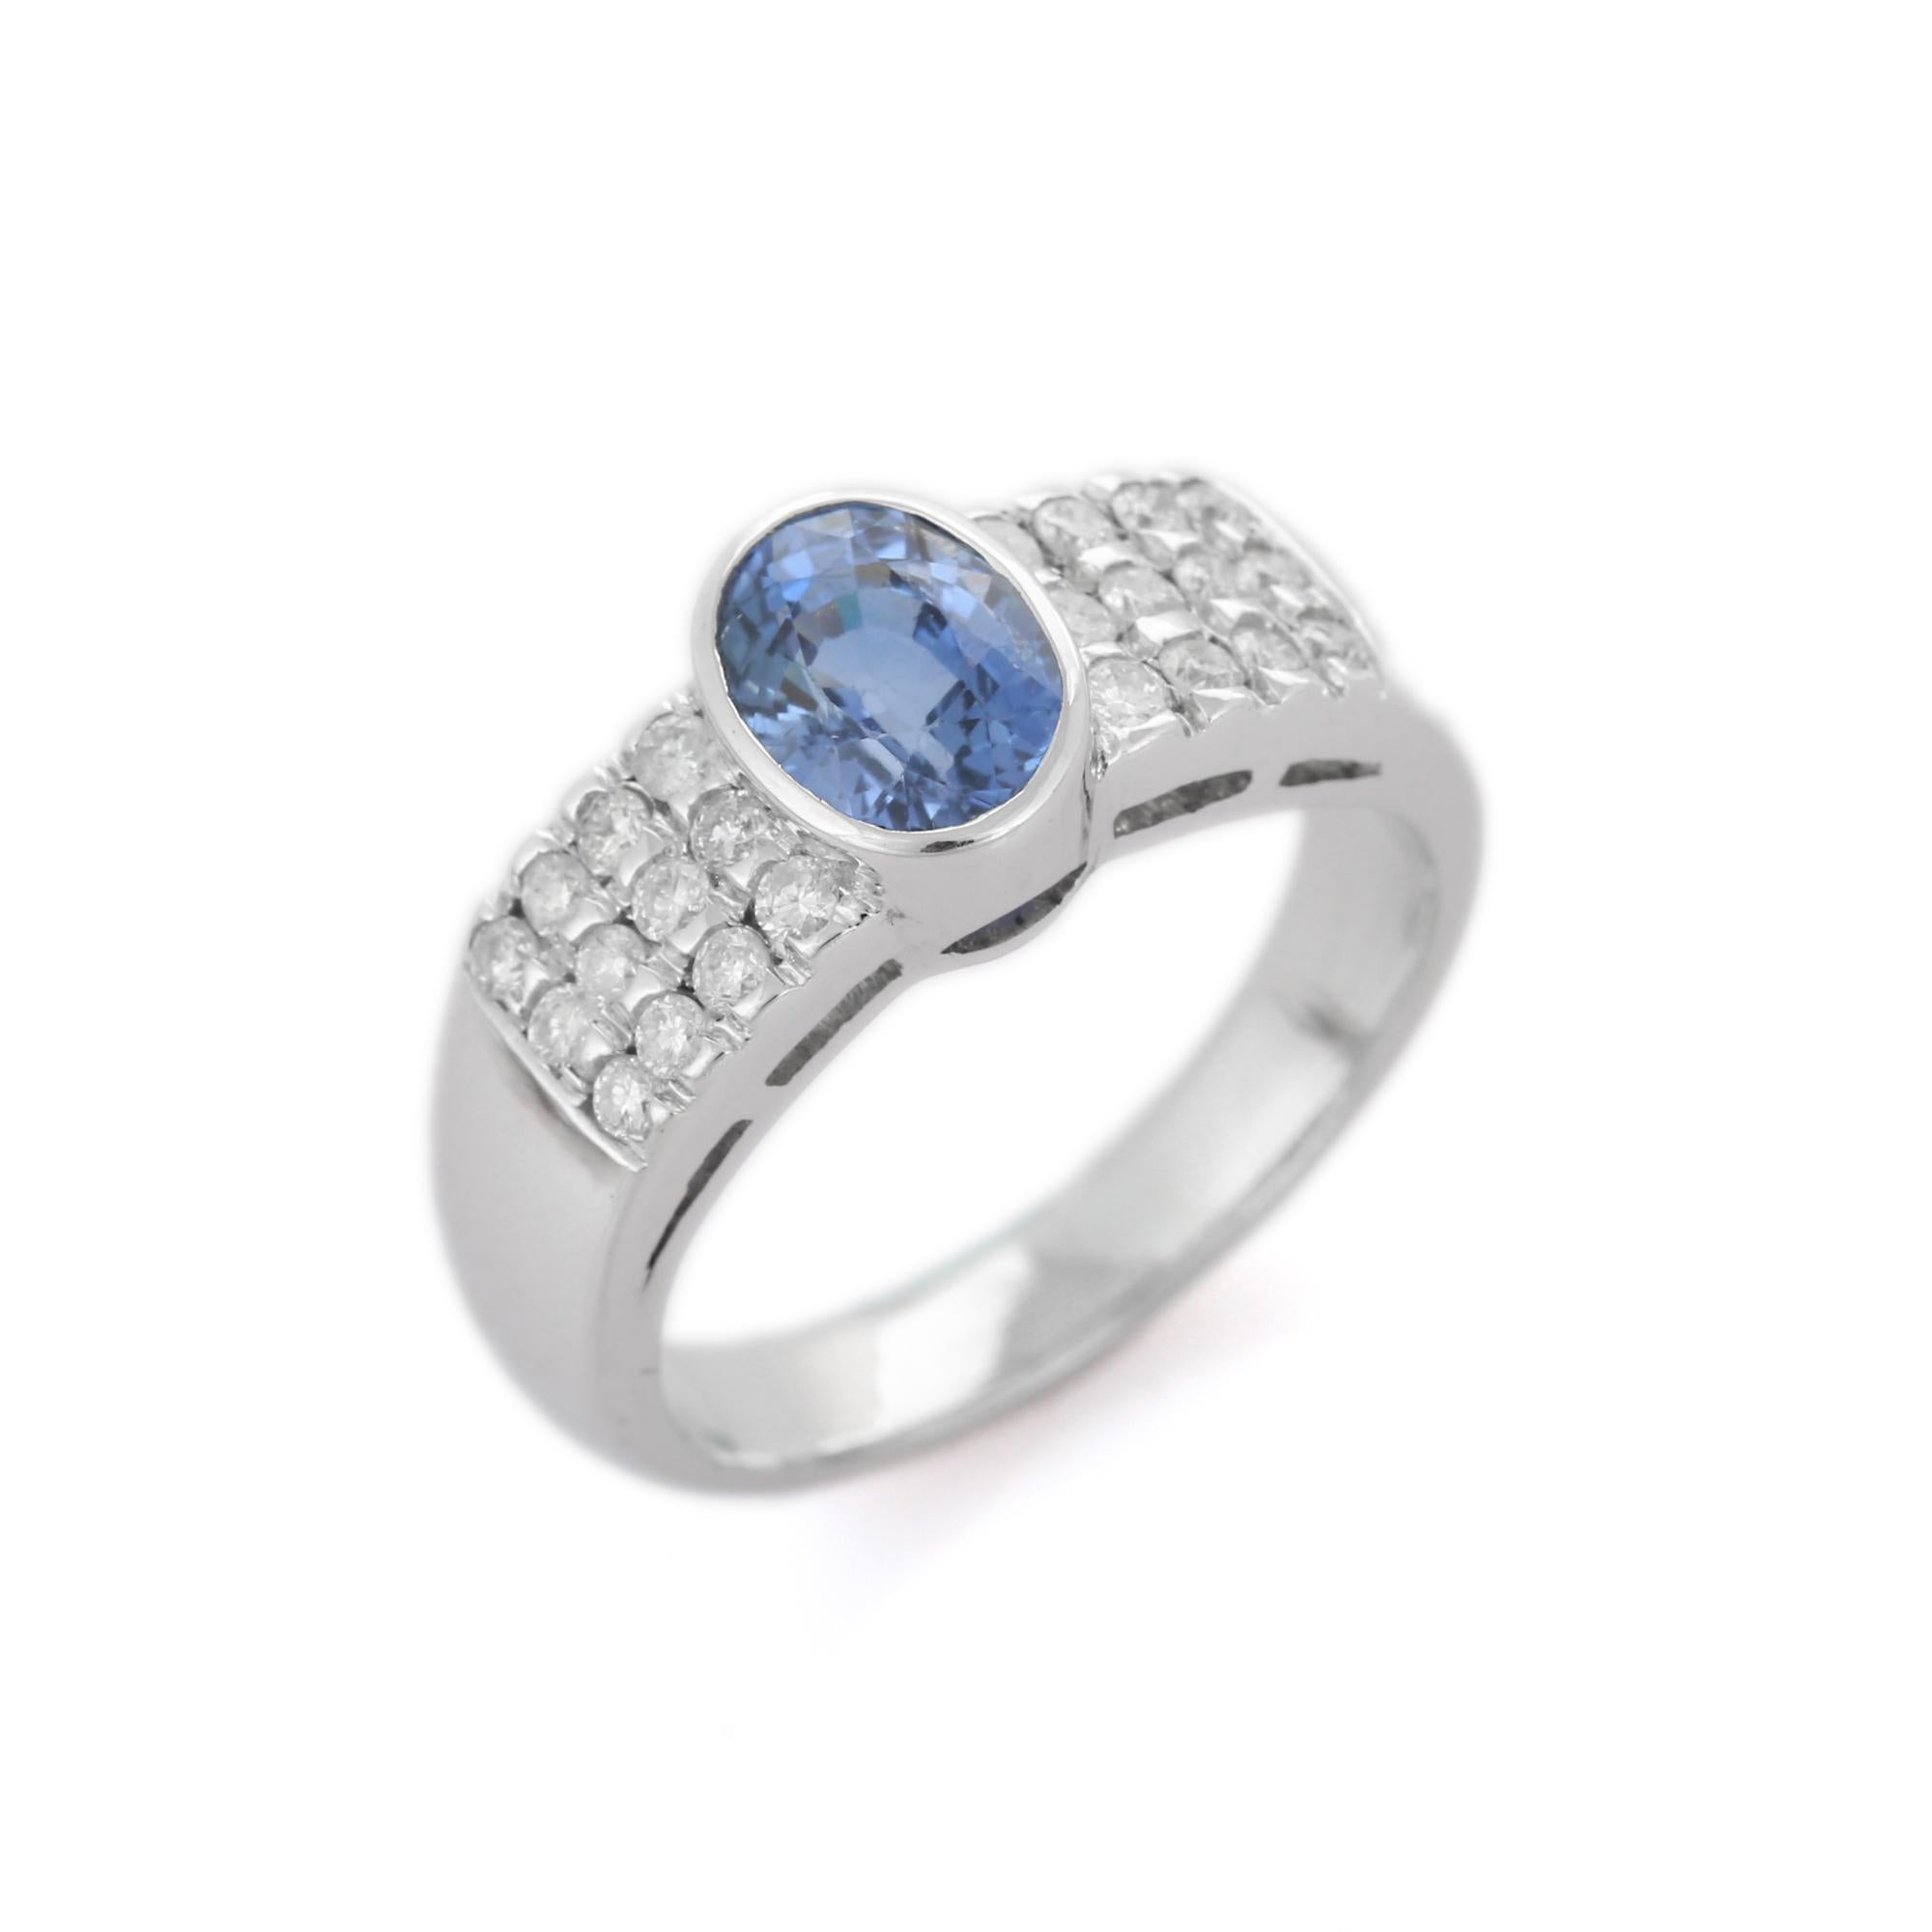 For Sale:  18 Karat White Gold 2.05 ct Oval Blue Sapphire and Diamond Engagement Ring  5